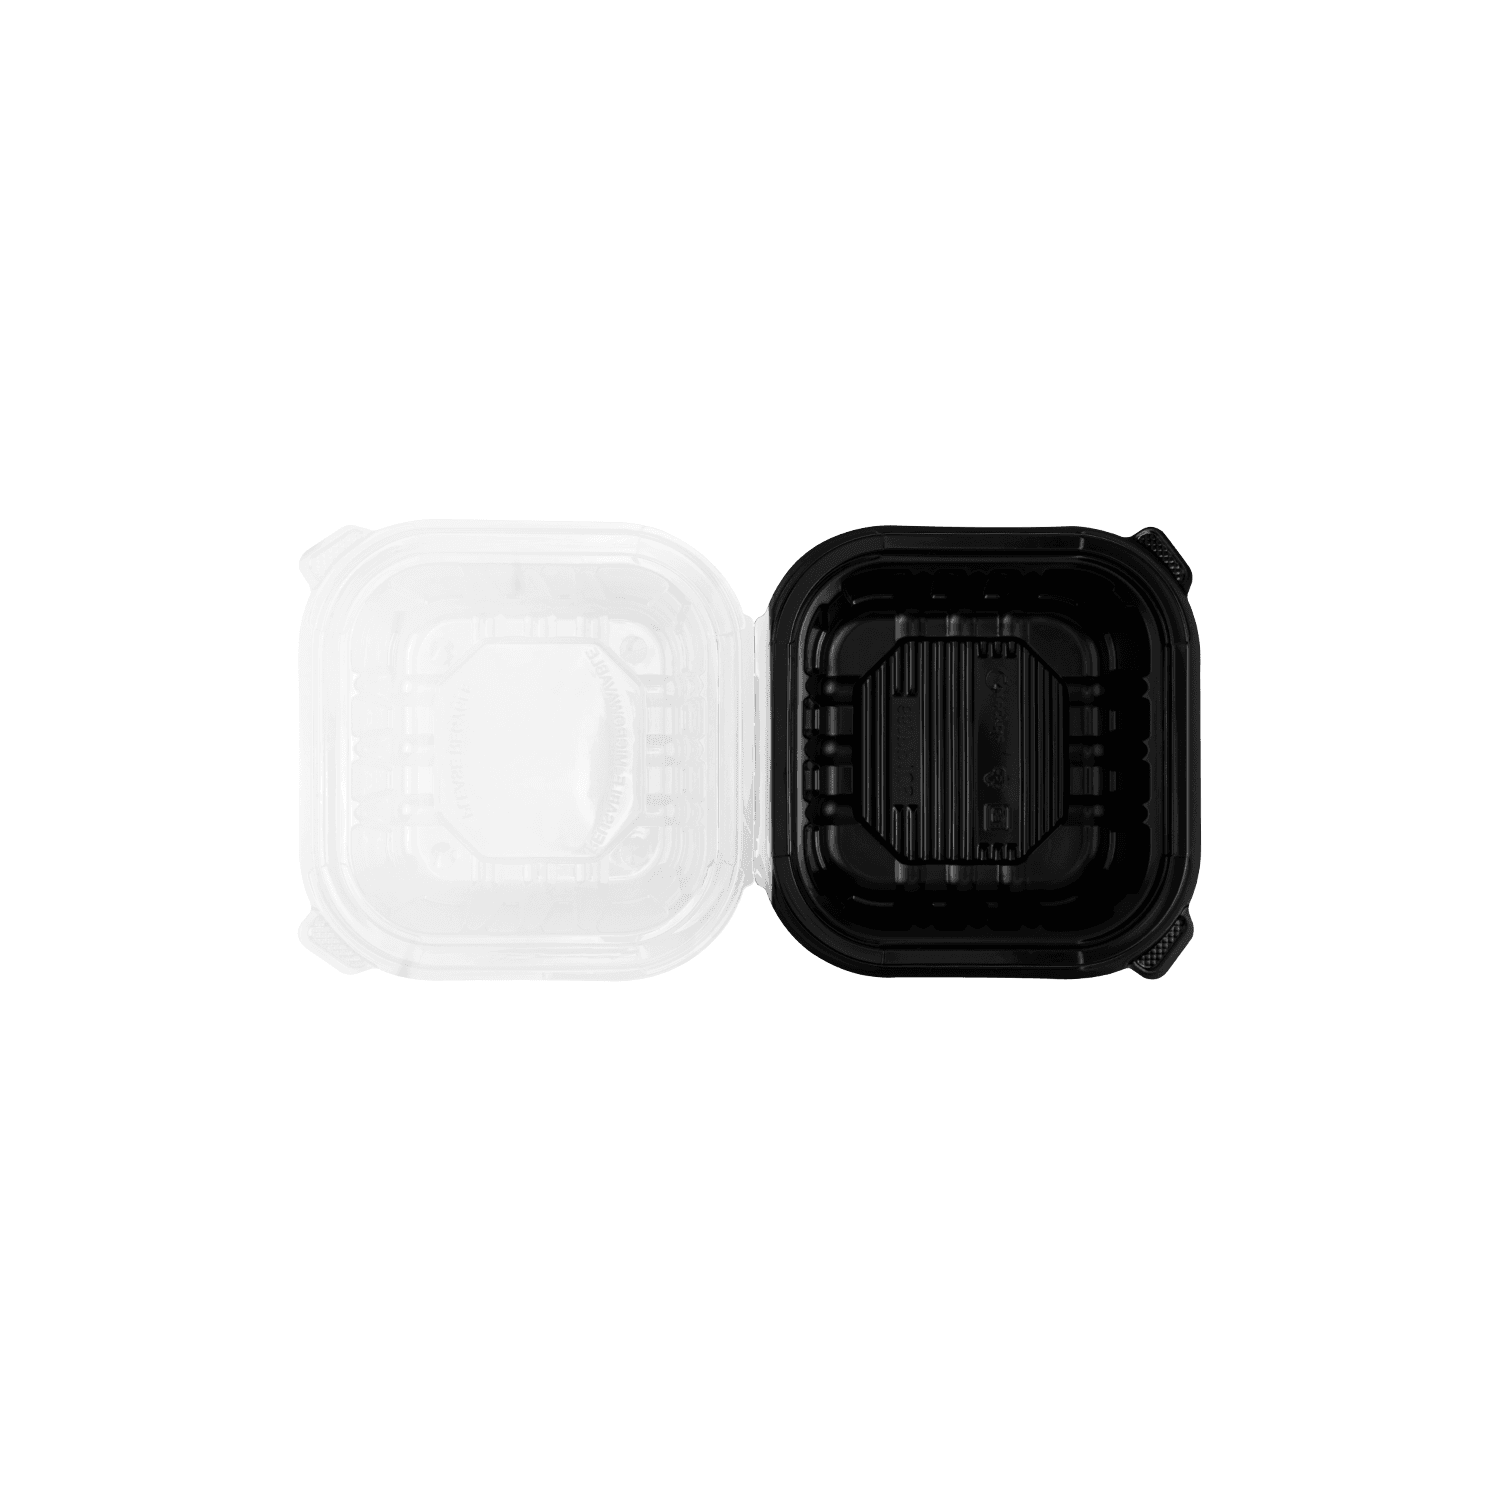 Karat 6"x 6" Premium PP Hinged Container open from above